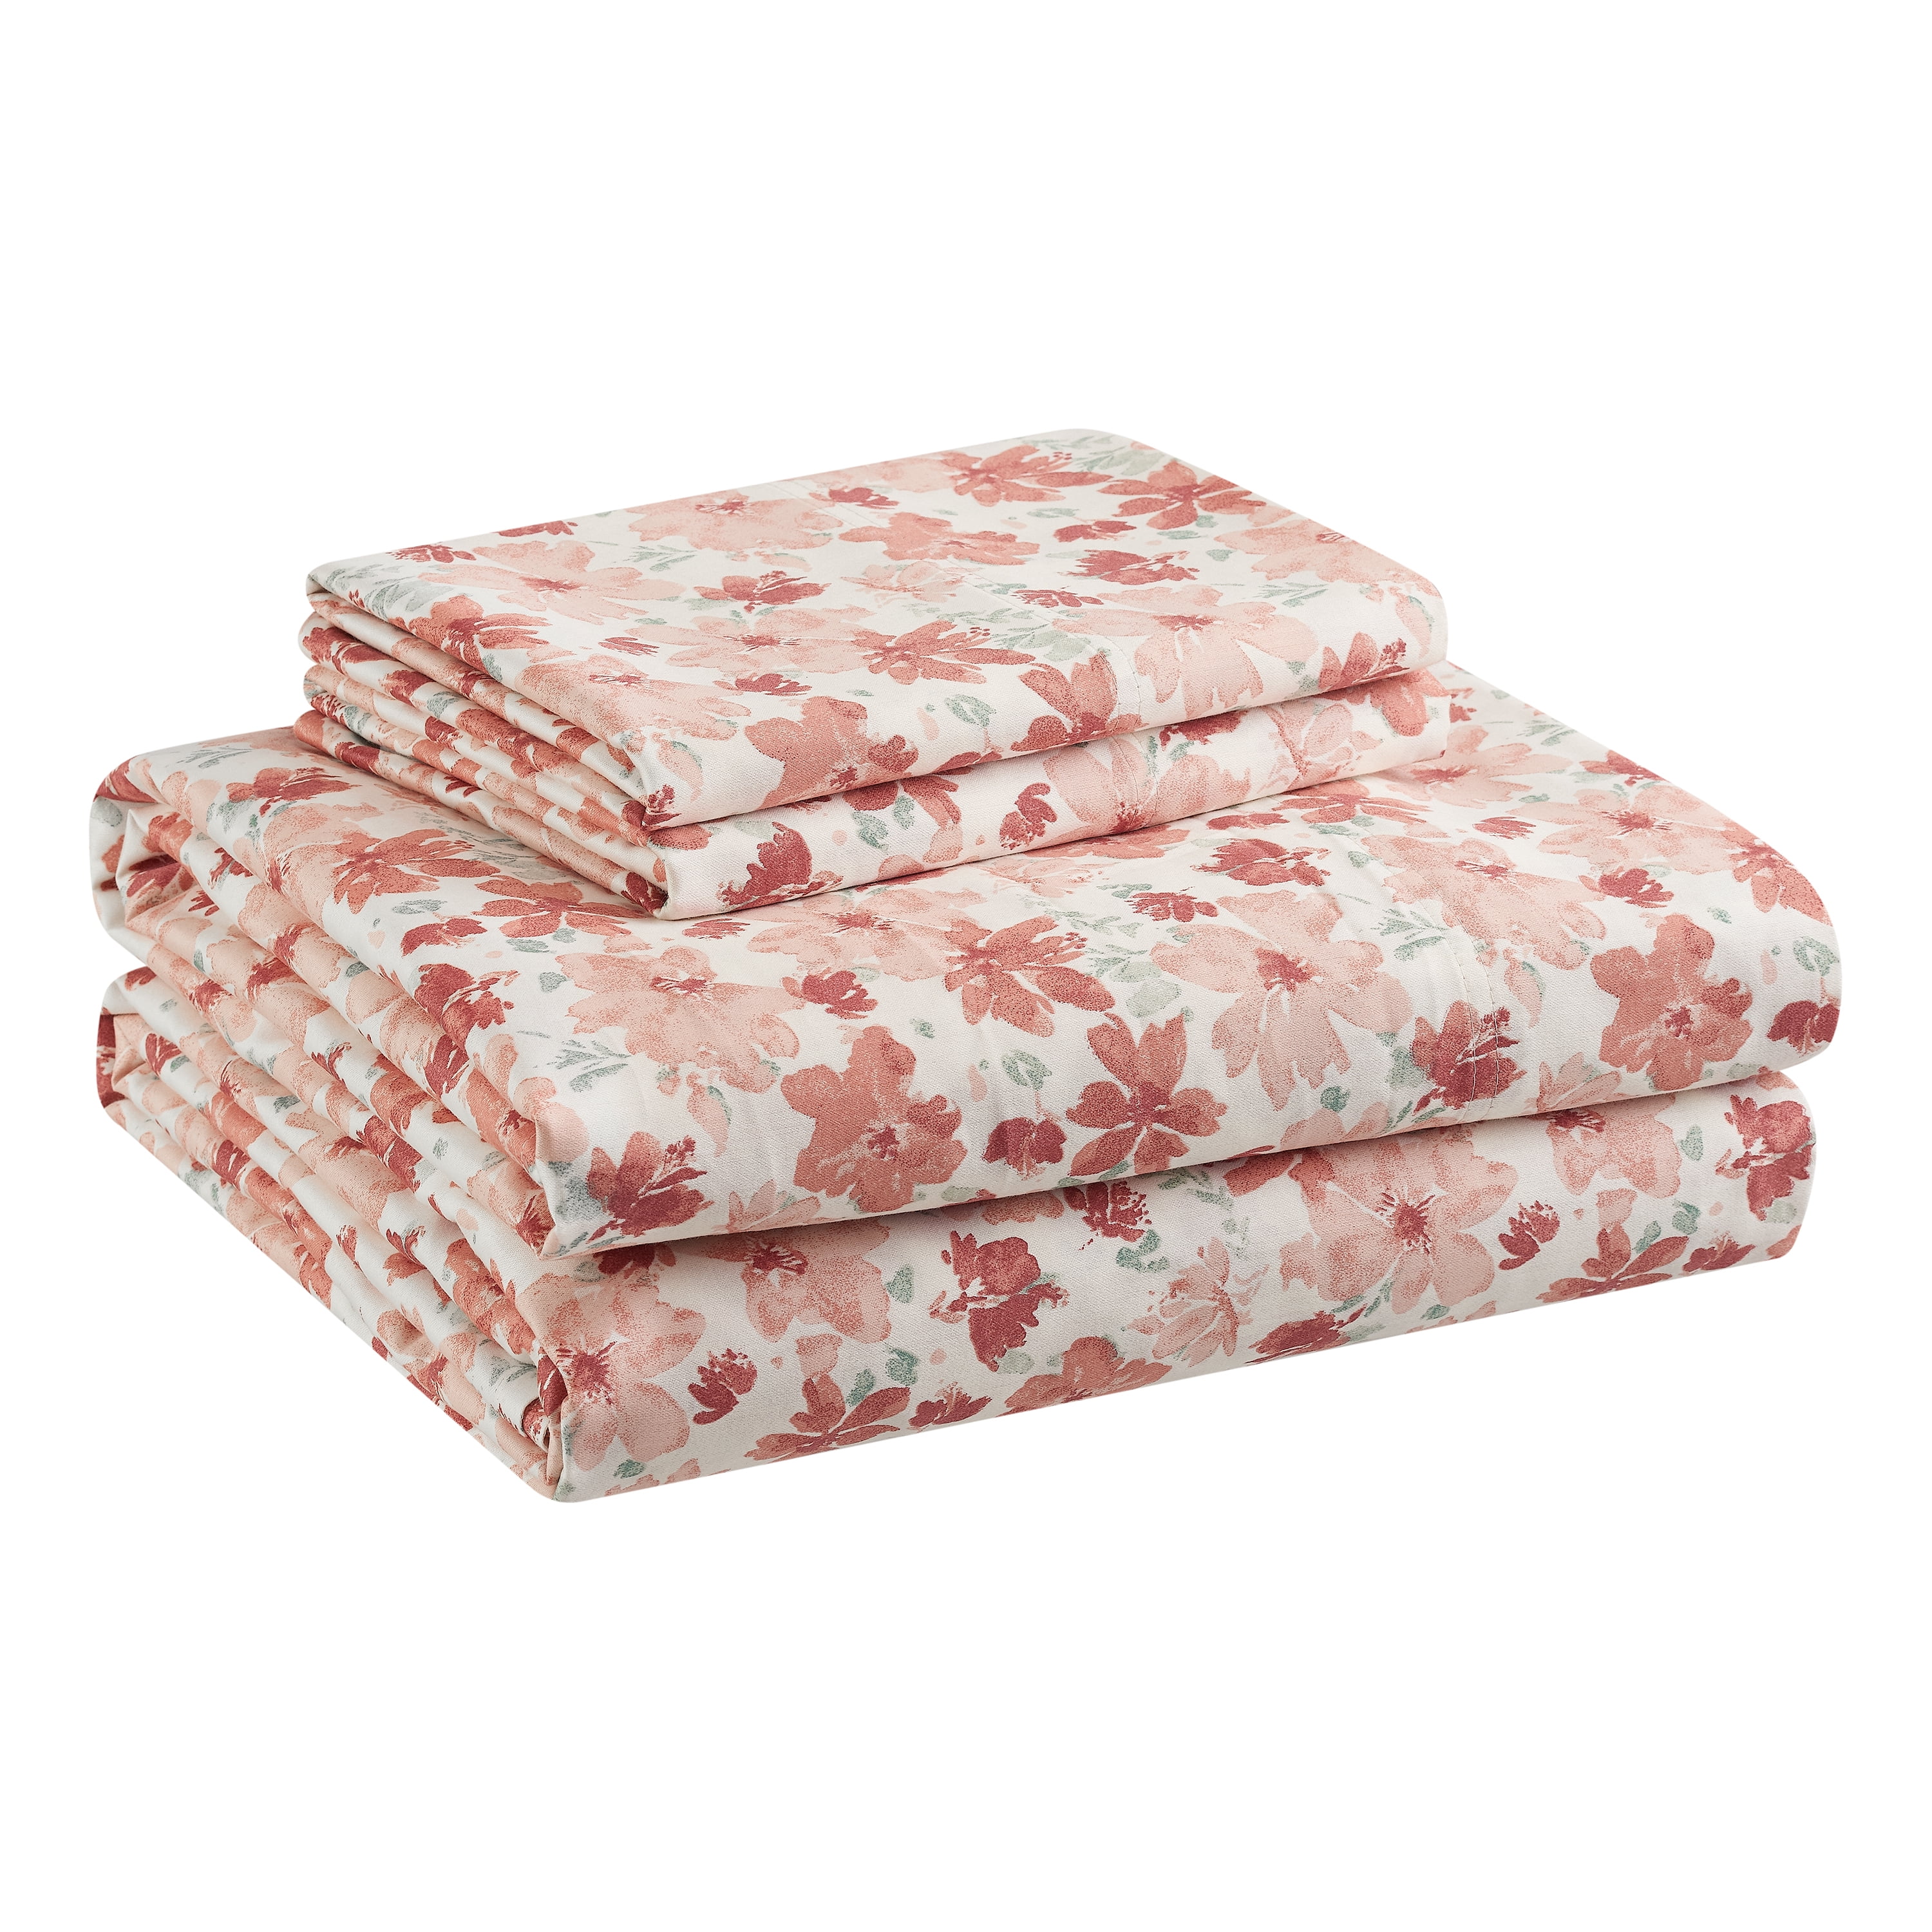 Better Homes & Gardens 300 Thread Count 100 Cotton Wrinkle Resistant Sheet Set, Queen Floral